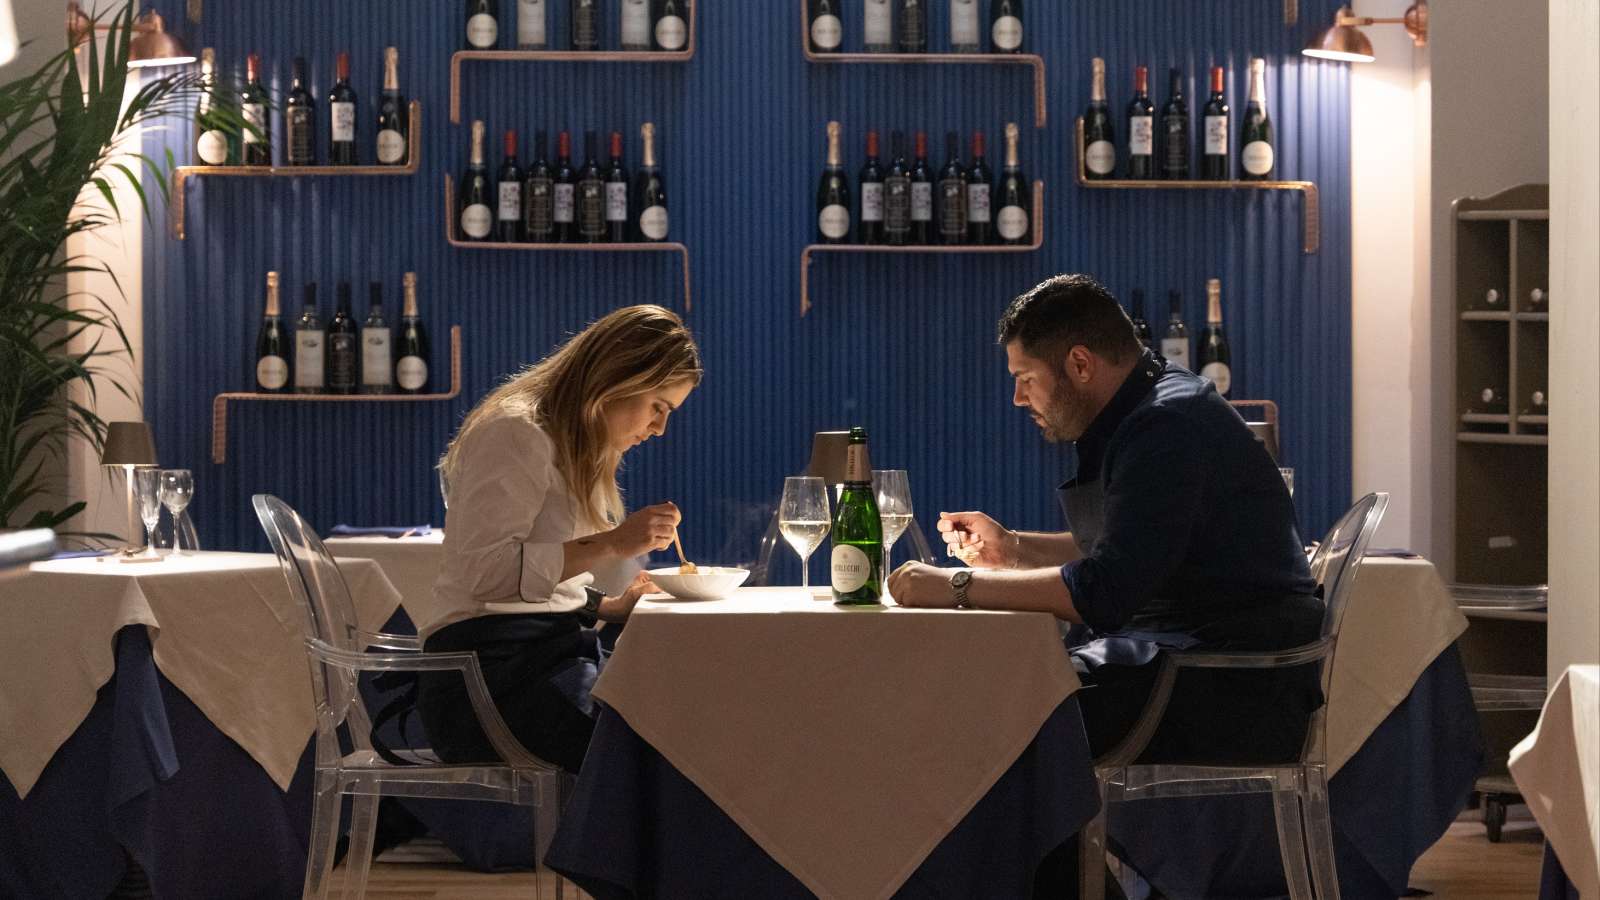 Italian Film Festival - The Perfect Dinner Movie Review